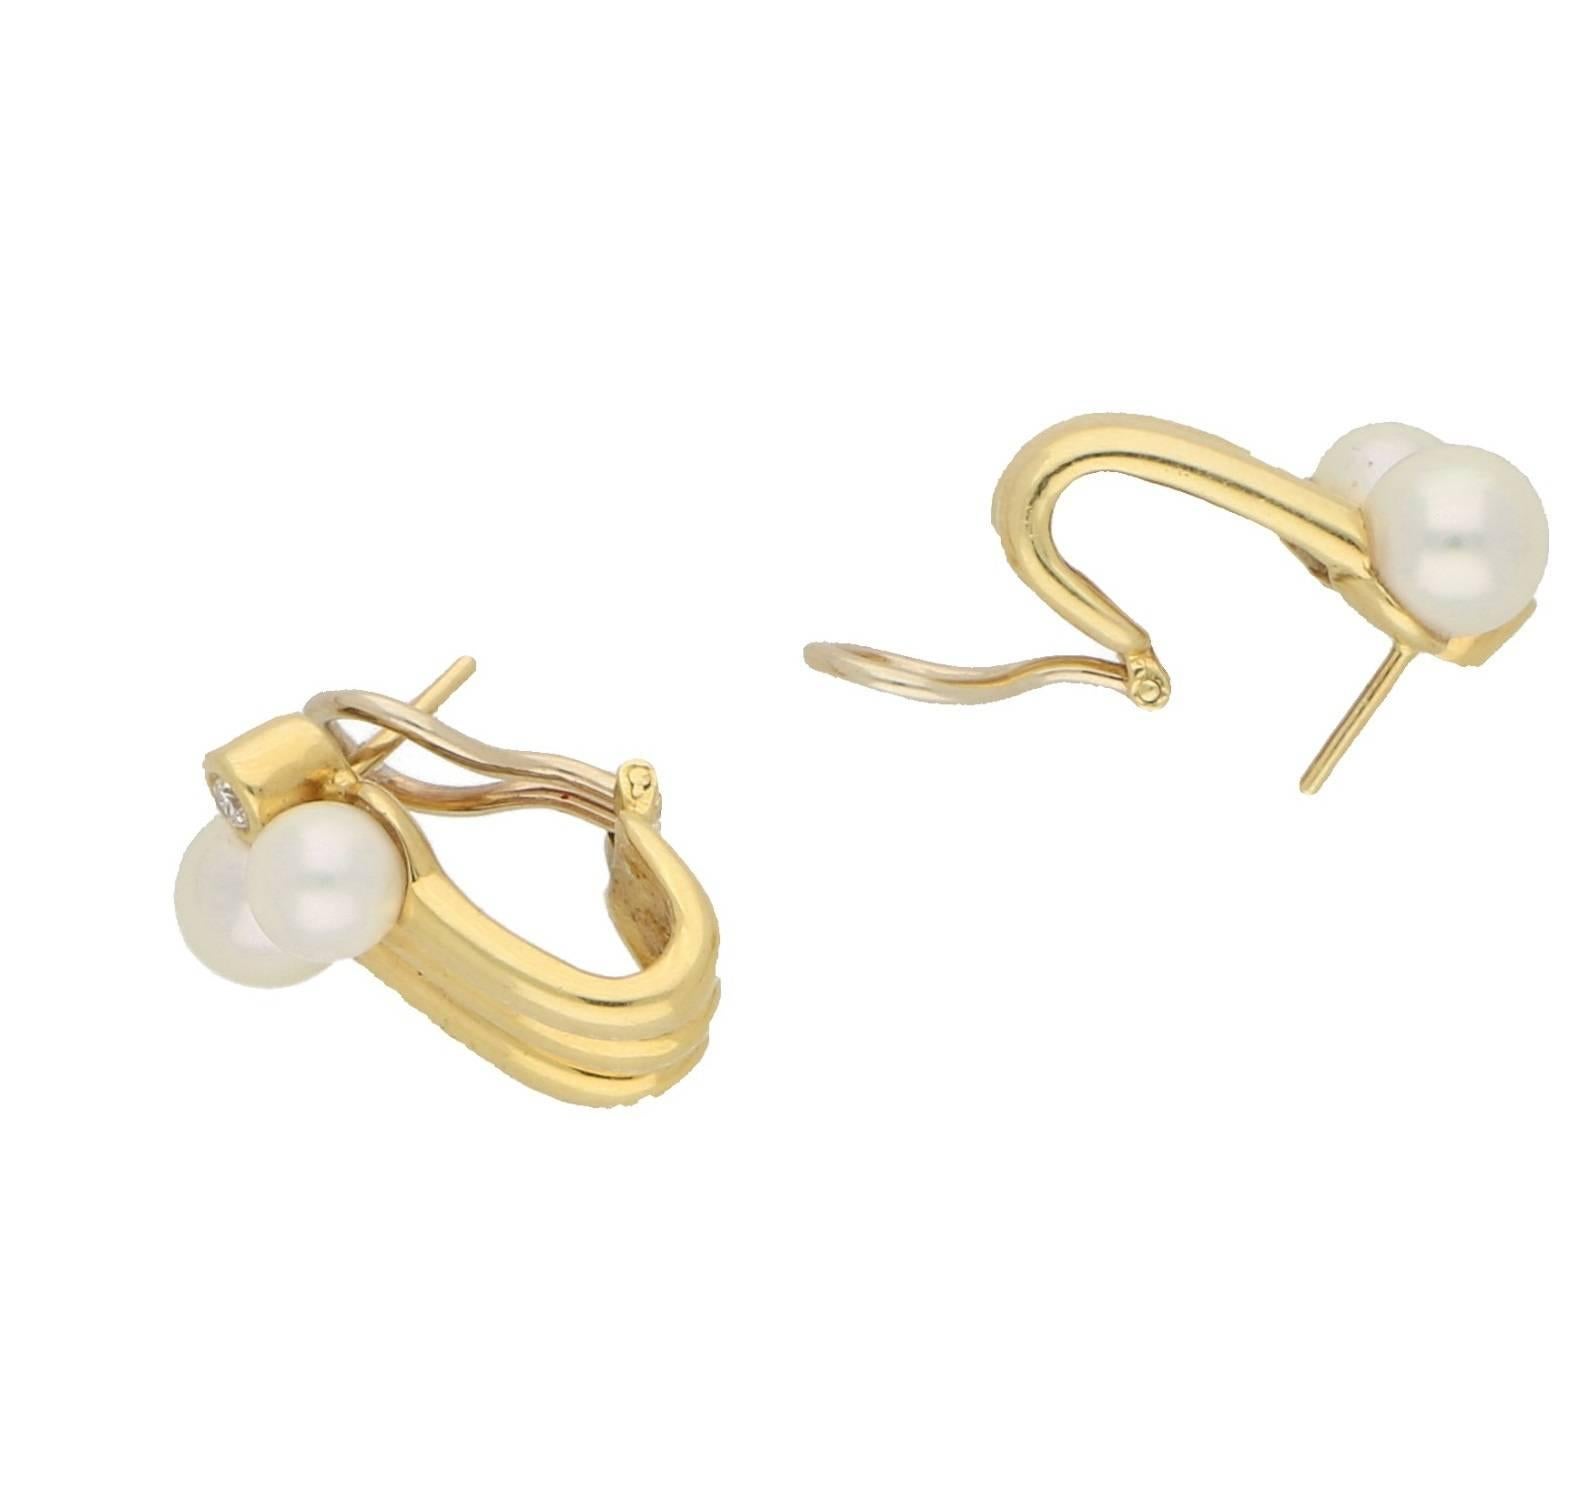 These stunning earrings comprise a round brilliant cut diamond in a rubover setting accented by two pearls that are set in three rows of 18kt yellow gold in a gas pipe design that curves under the post fitting. Total estimated diamond weight,